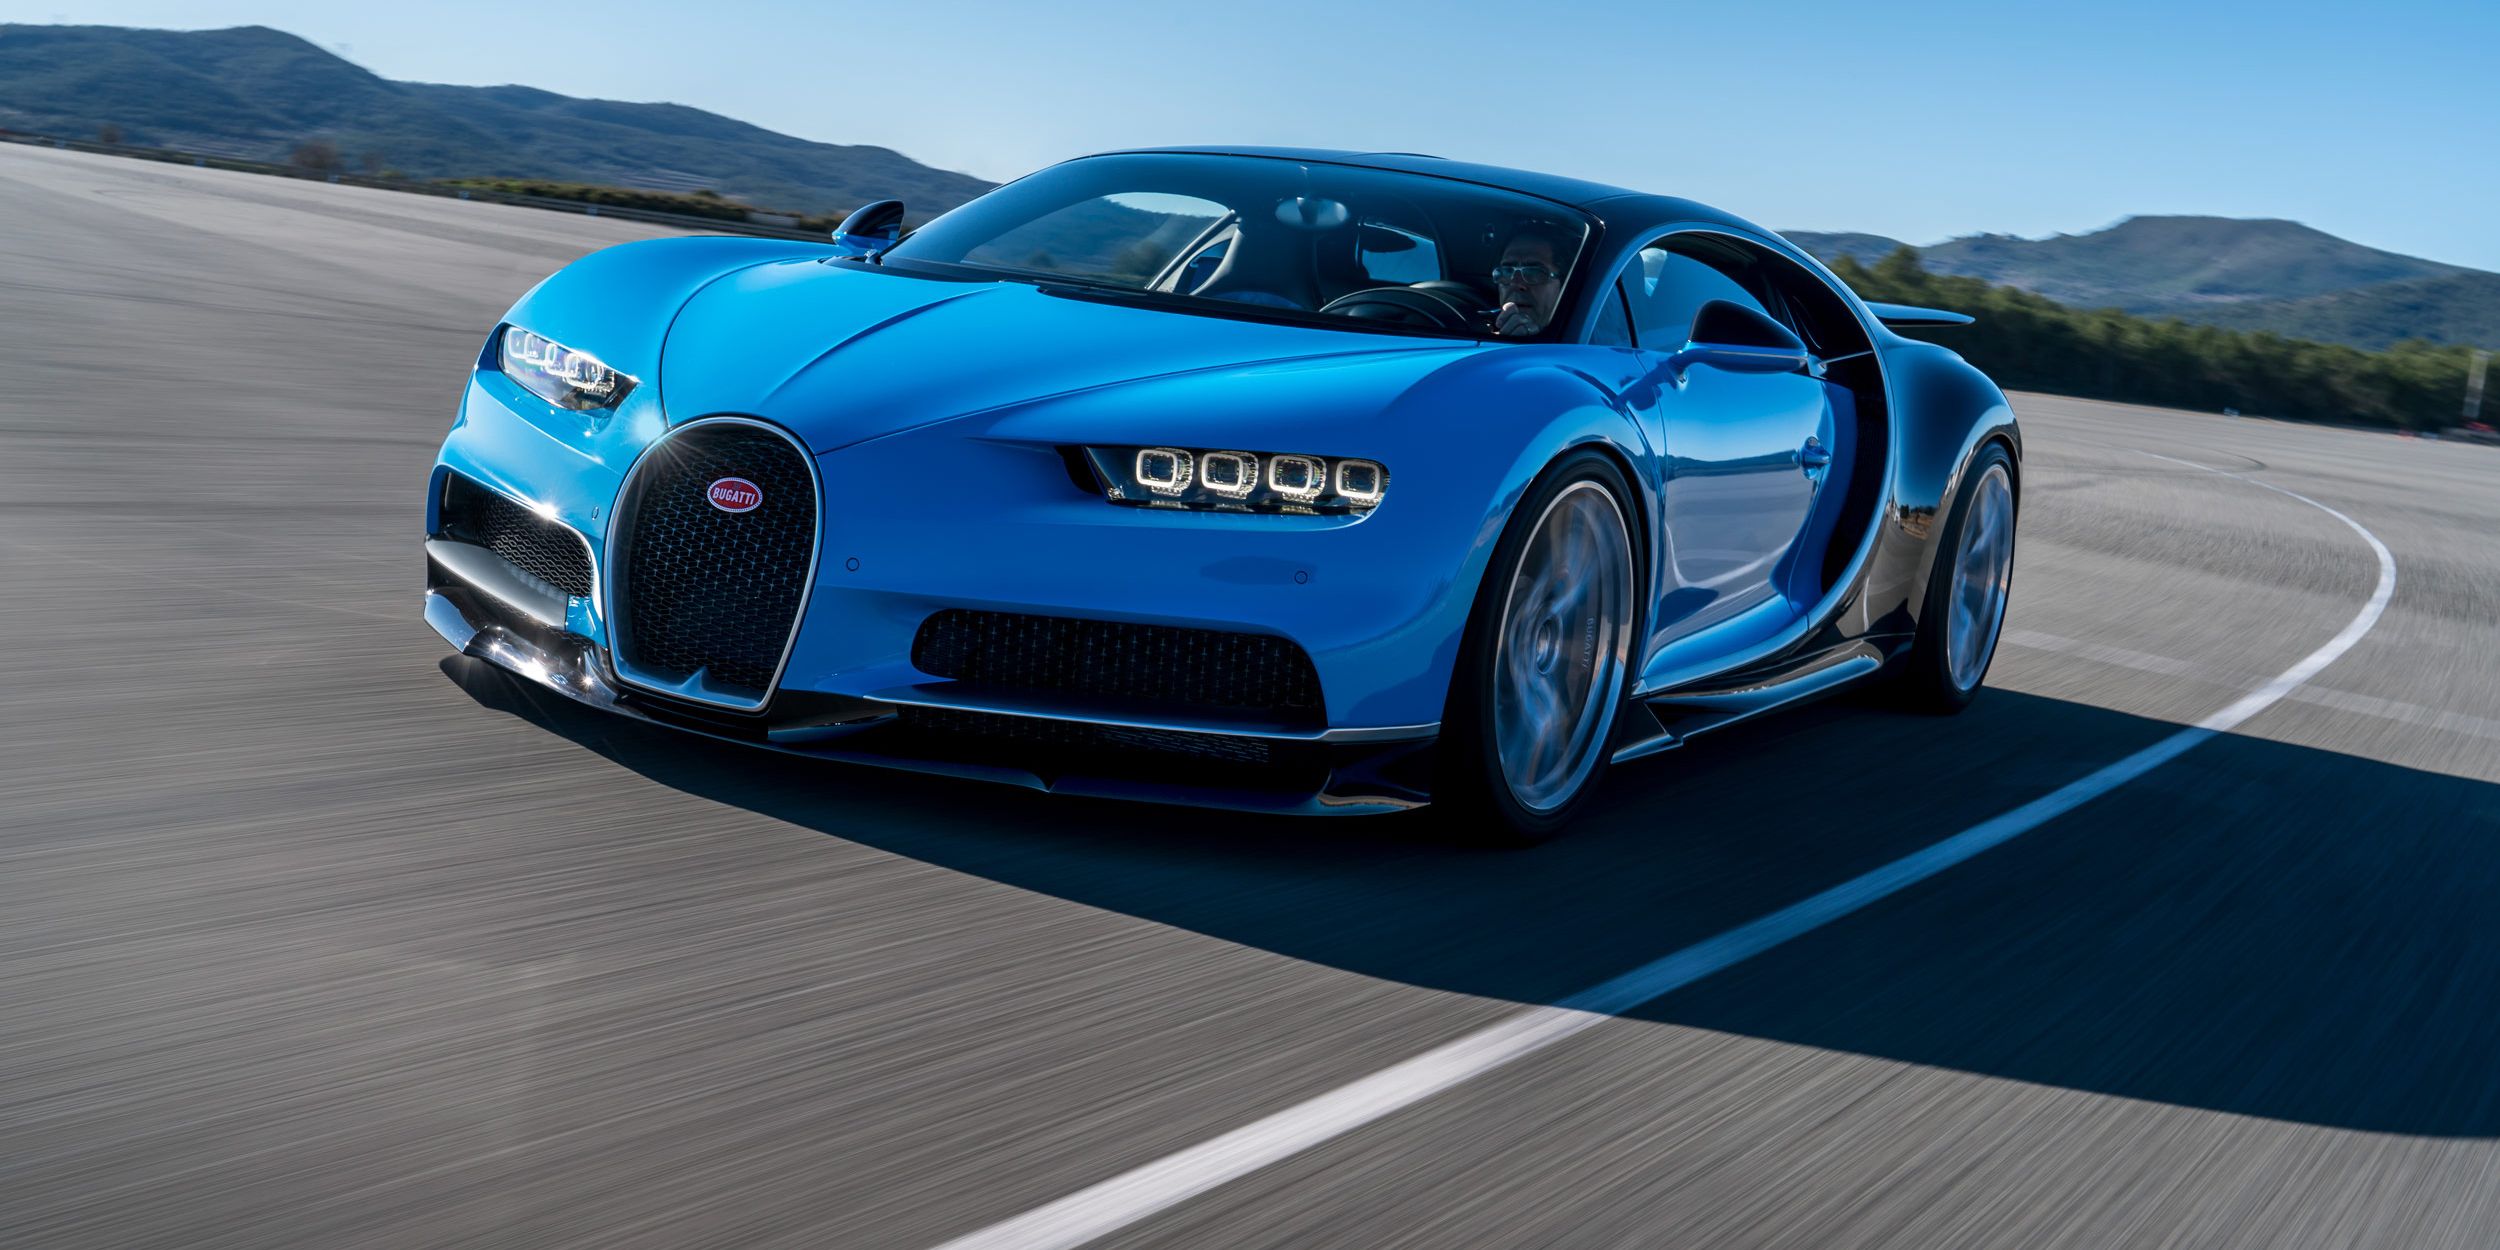 The Chiron Show Your Top Its Climate Control Displays